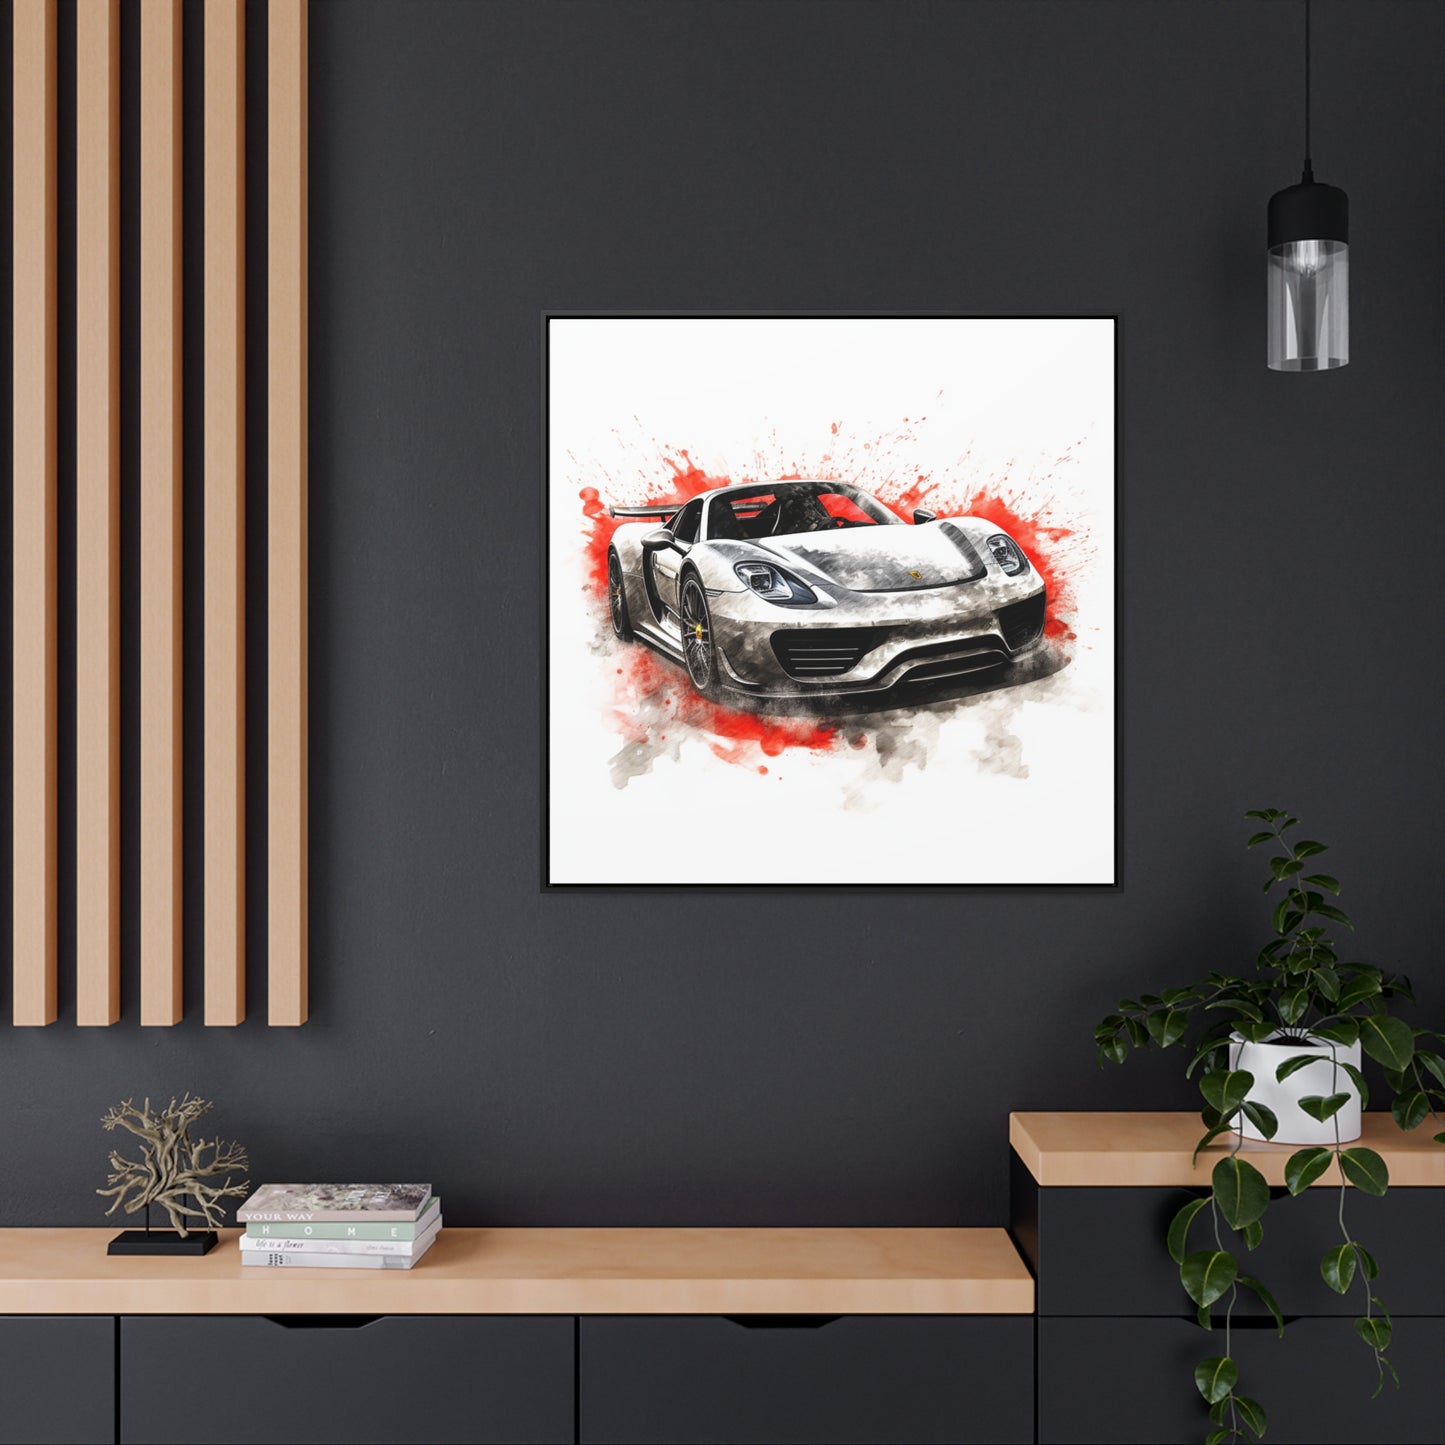 Gallery Canvas Wraps, Square Frame 918 Spyder white background driving fast with water splashing 4